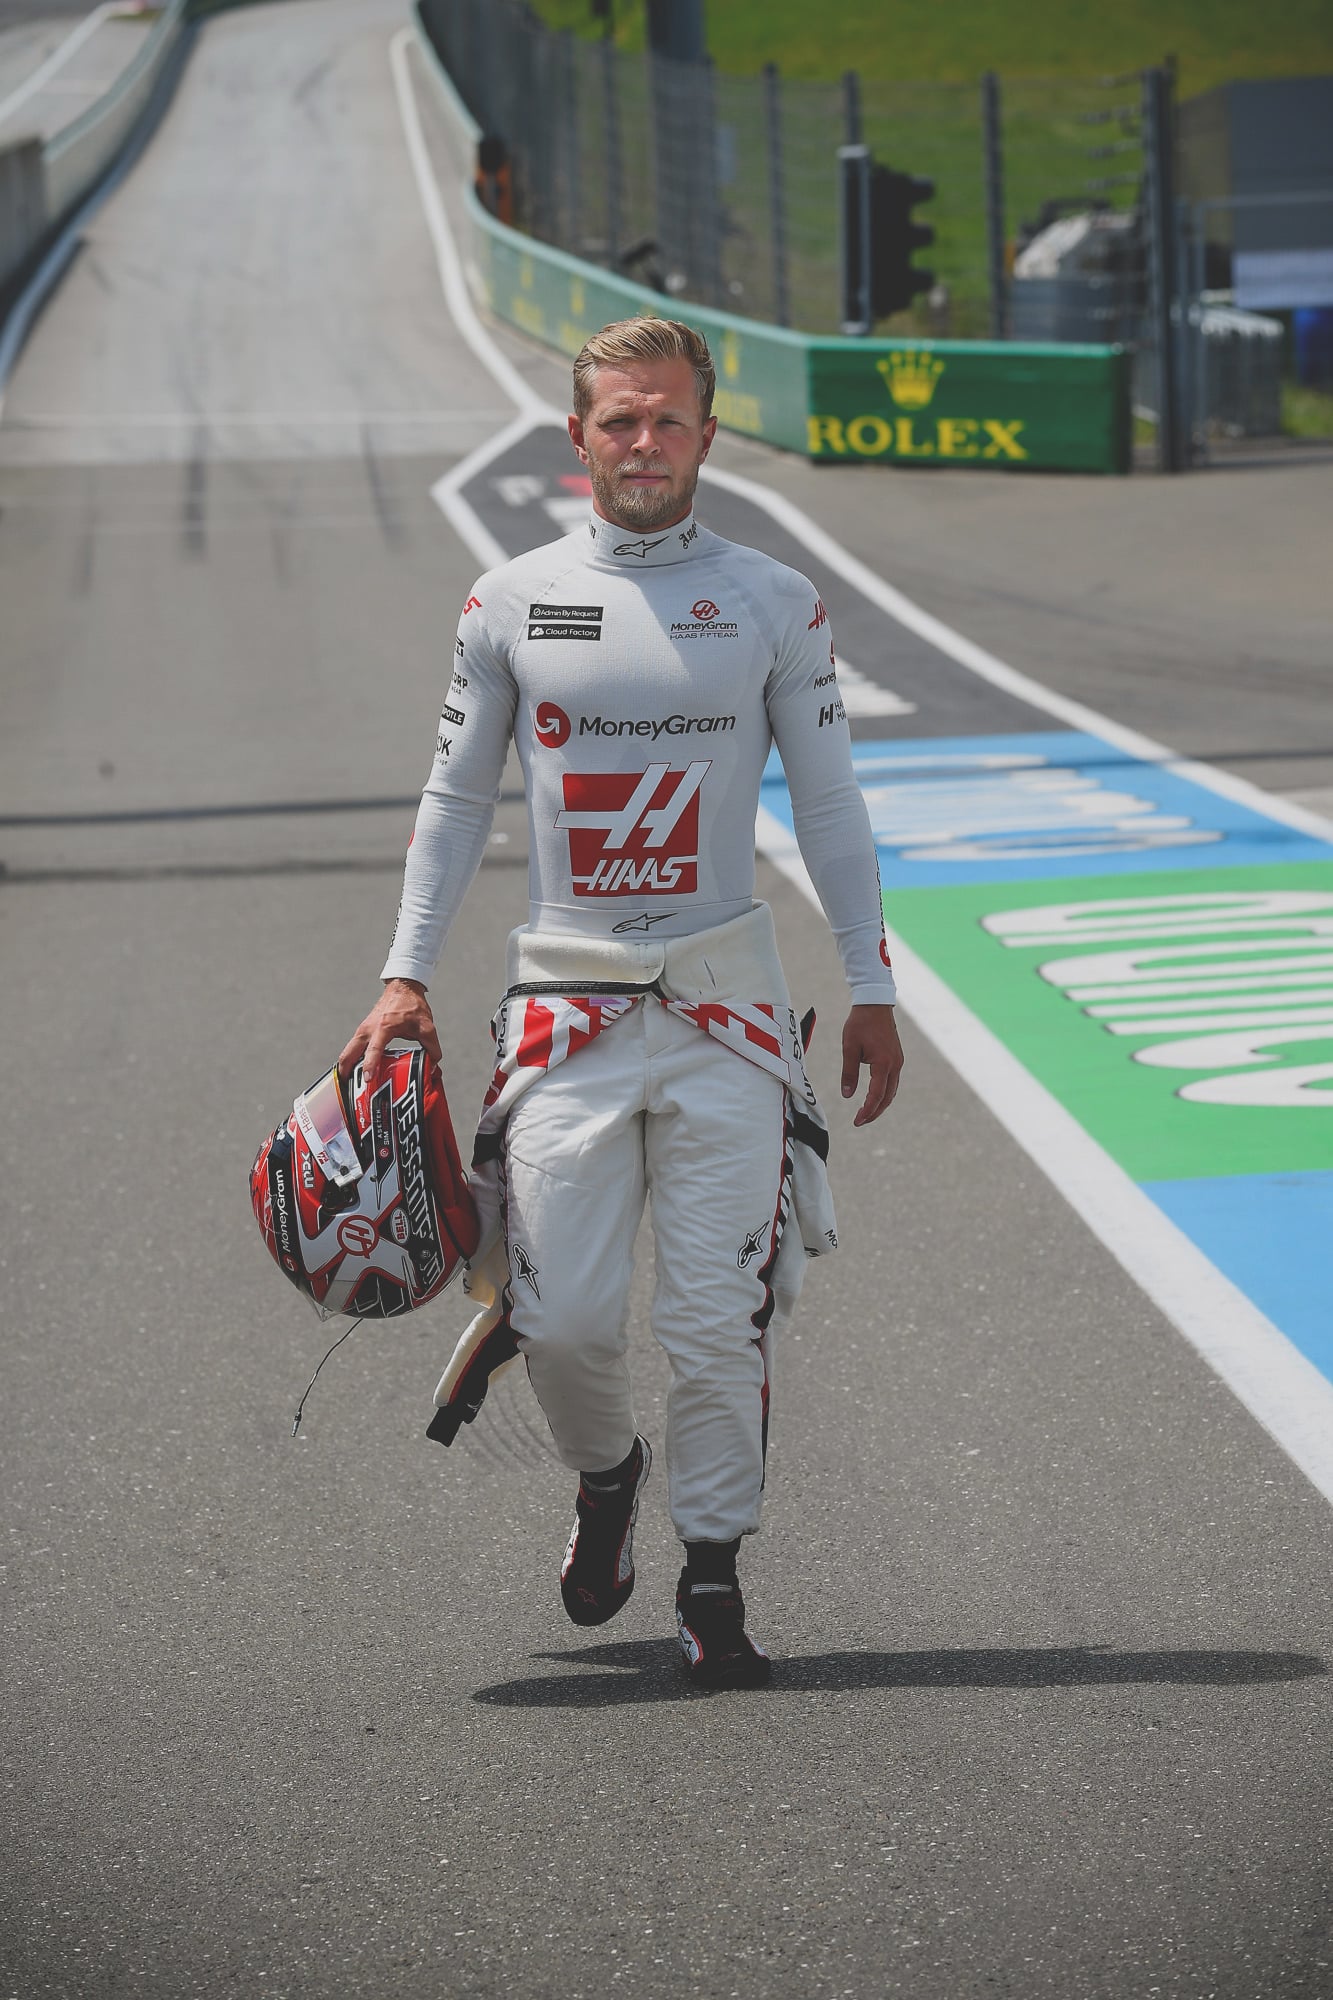 Kevin magnussen walking at the austrian grand prix holding his helmet. » admin by request » admin by request